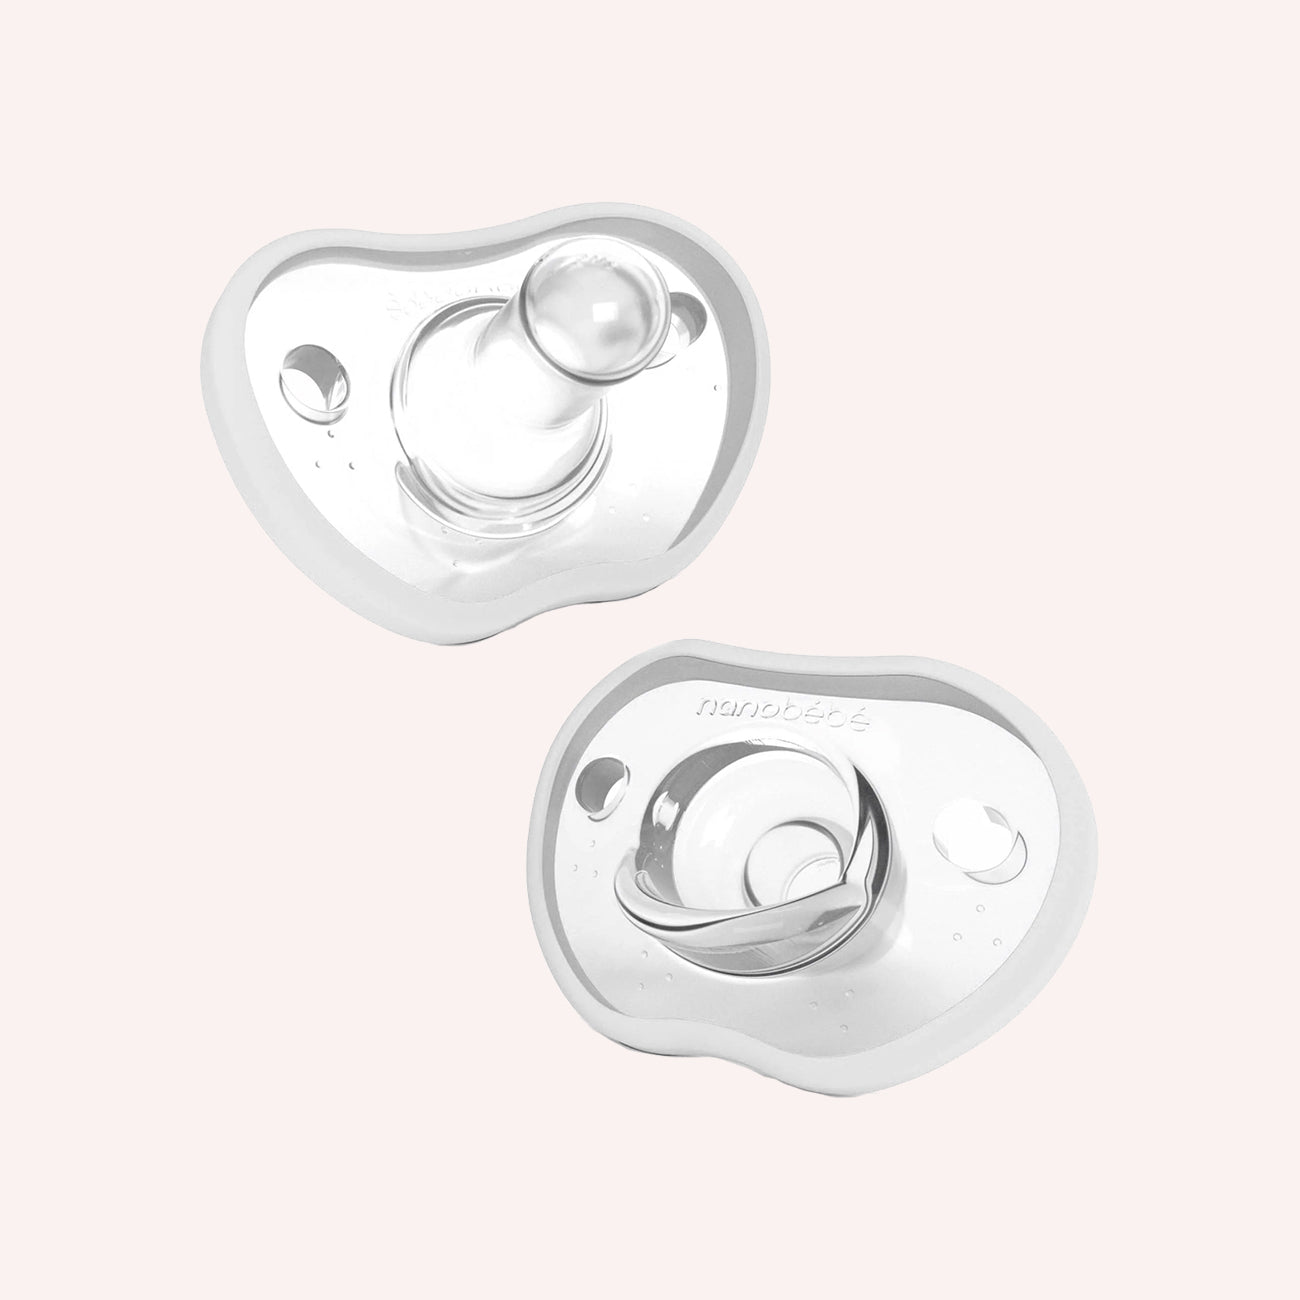 Flexy Pacifier Twin Pack - White